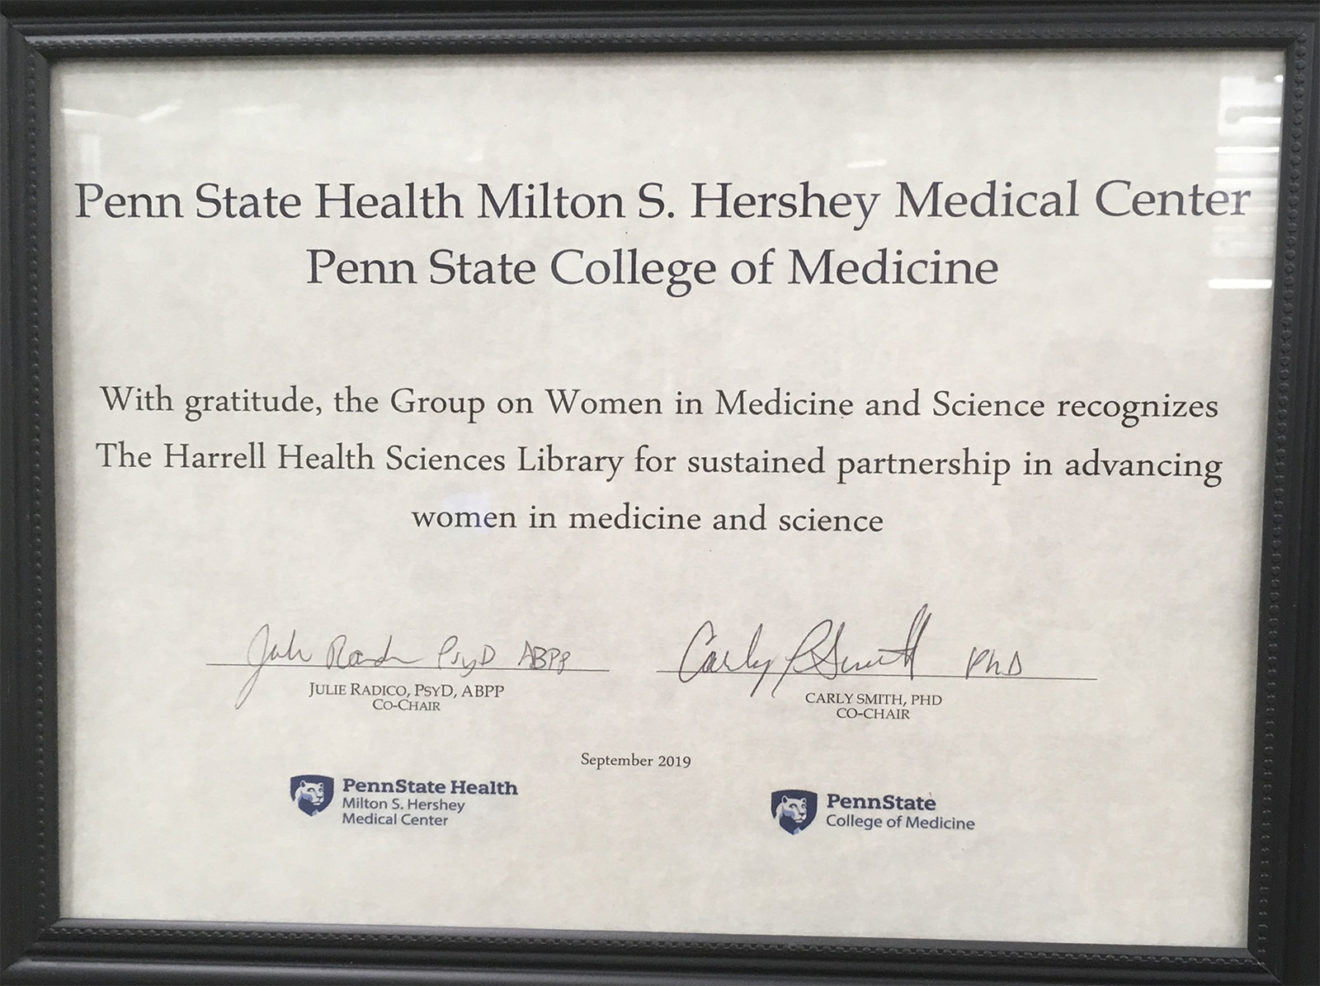 A framed certificate honoring Harrell Health Sciences Library is seen signed by leaders of the Group on Women in Medicine and Science.